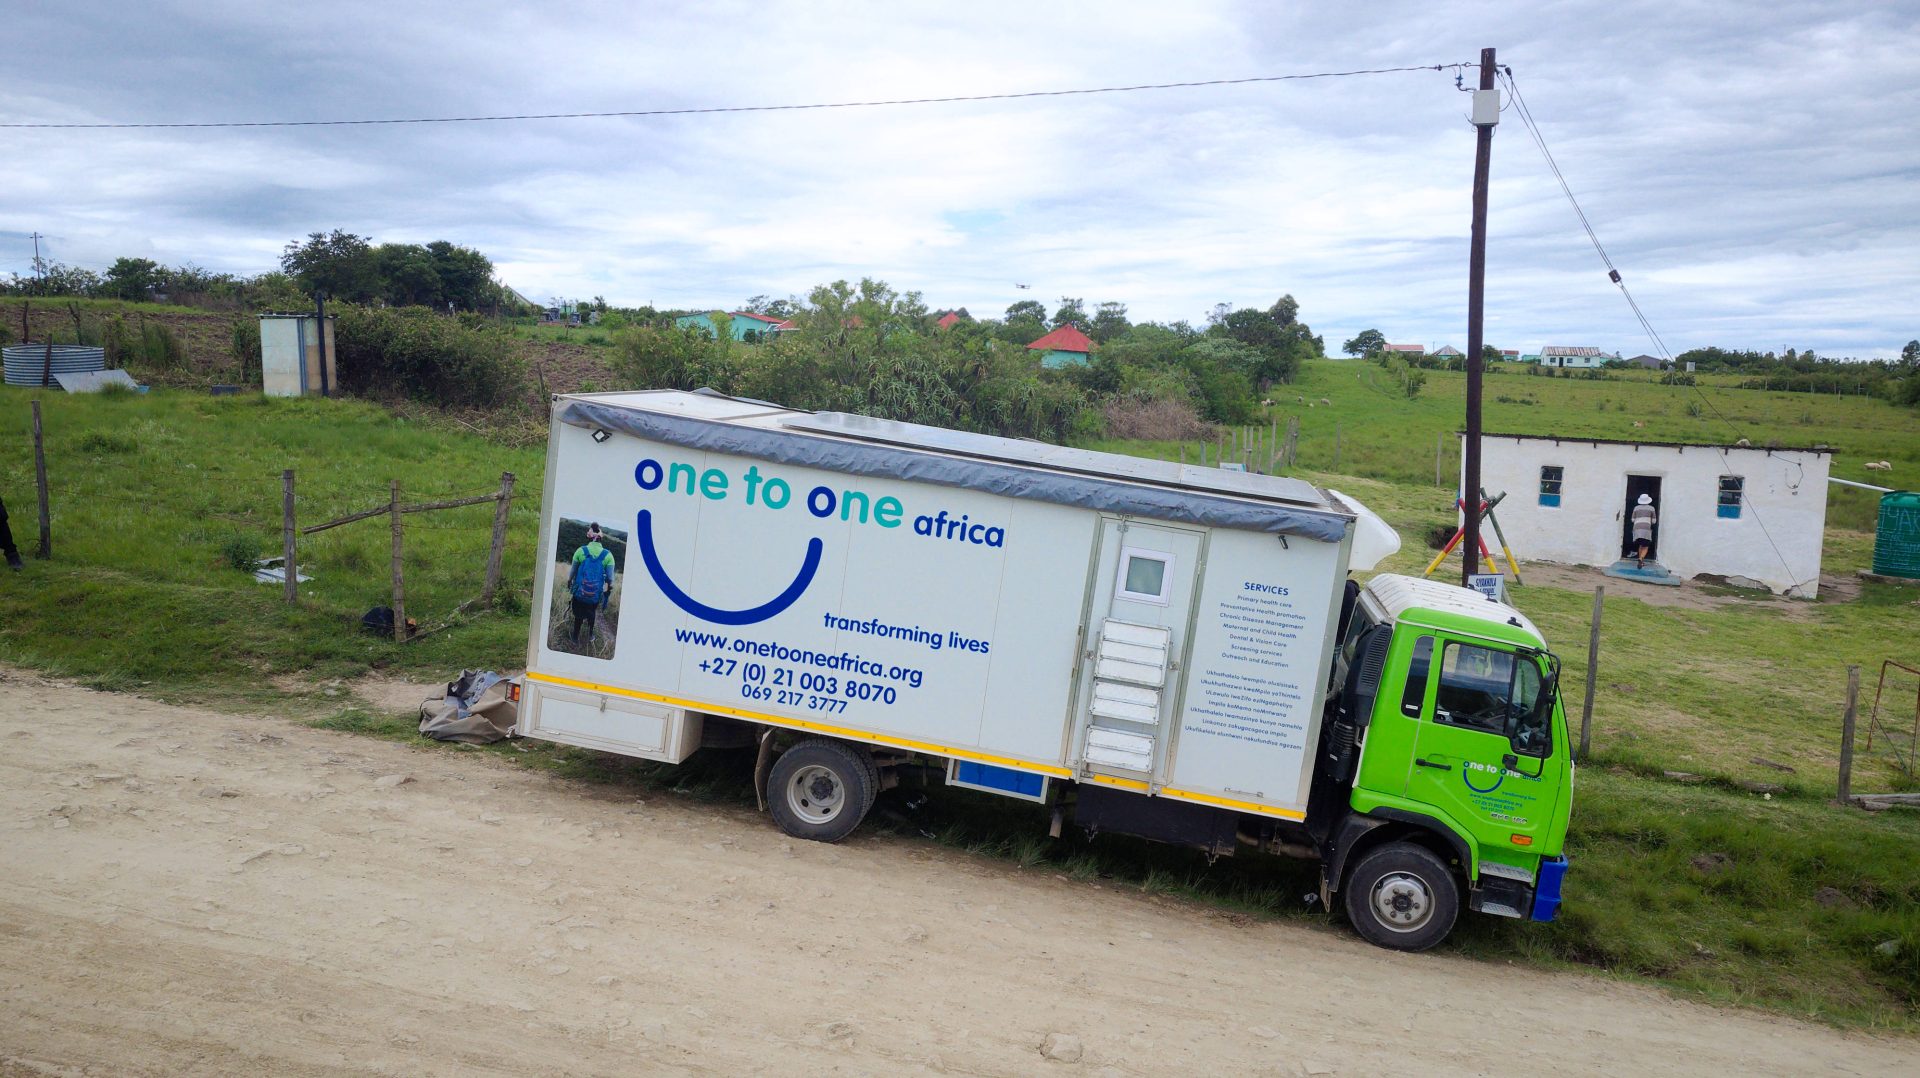 A Mobile Clinic Launched to Serve Last Mile Communities in the EC [Video]